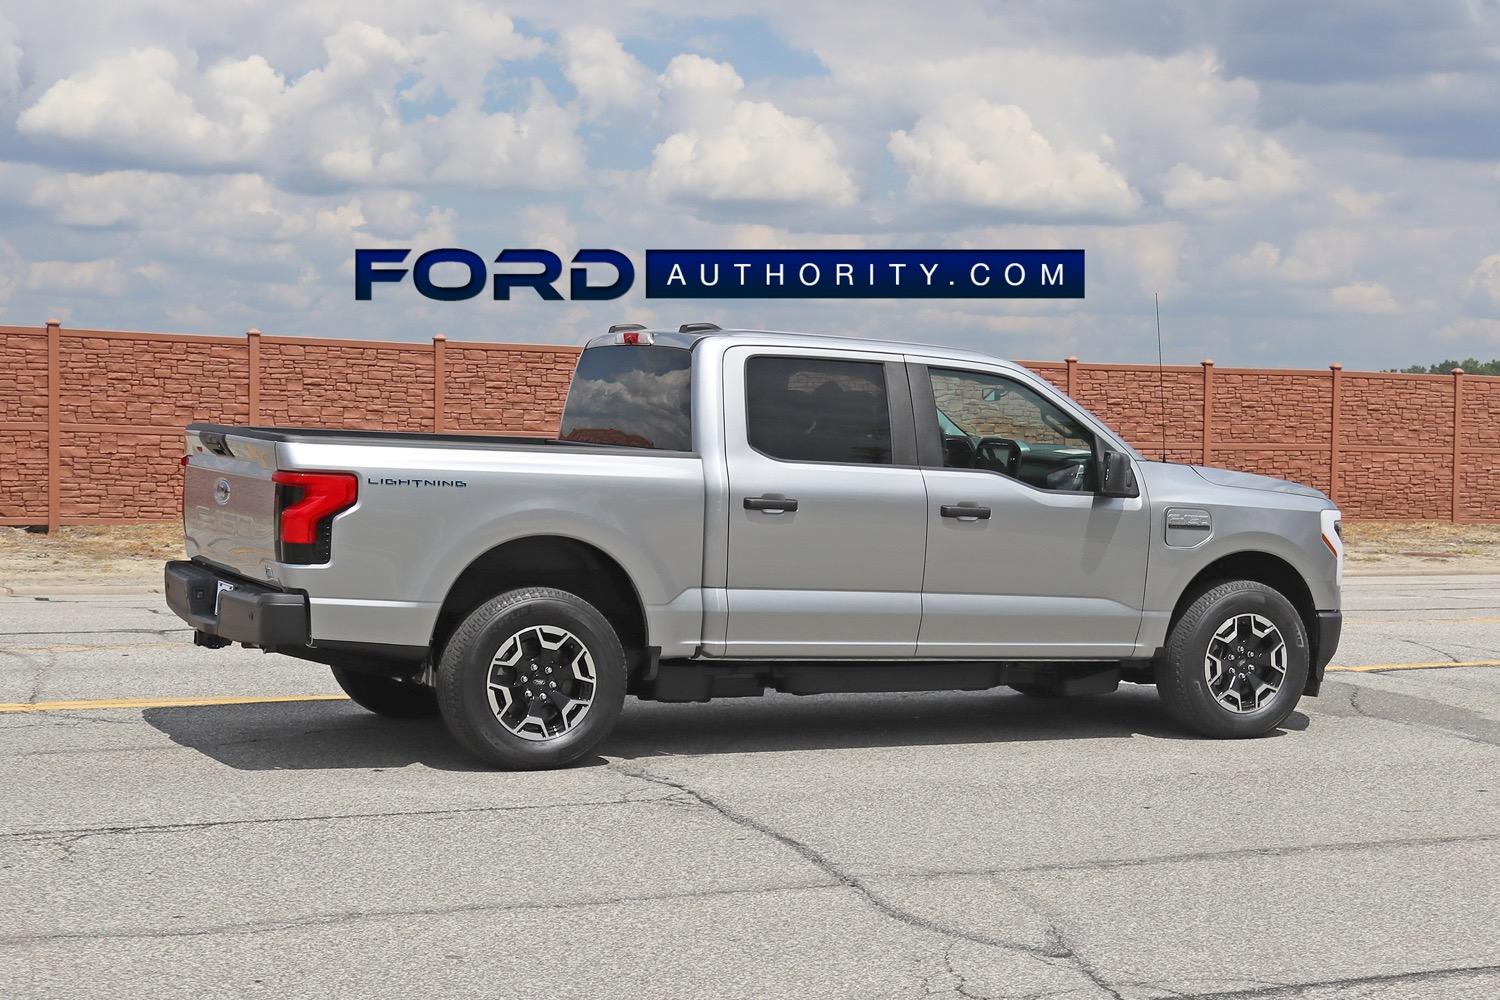 Ford F-150 Lightning ICONIC SILVER F-150 Lightning Photos & Club 2022-Ford-F-150-Lightning-Pro-Iconic-Silver-Real-World-Pictures-Exterior-005